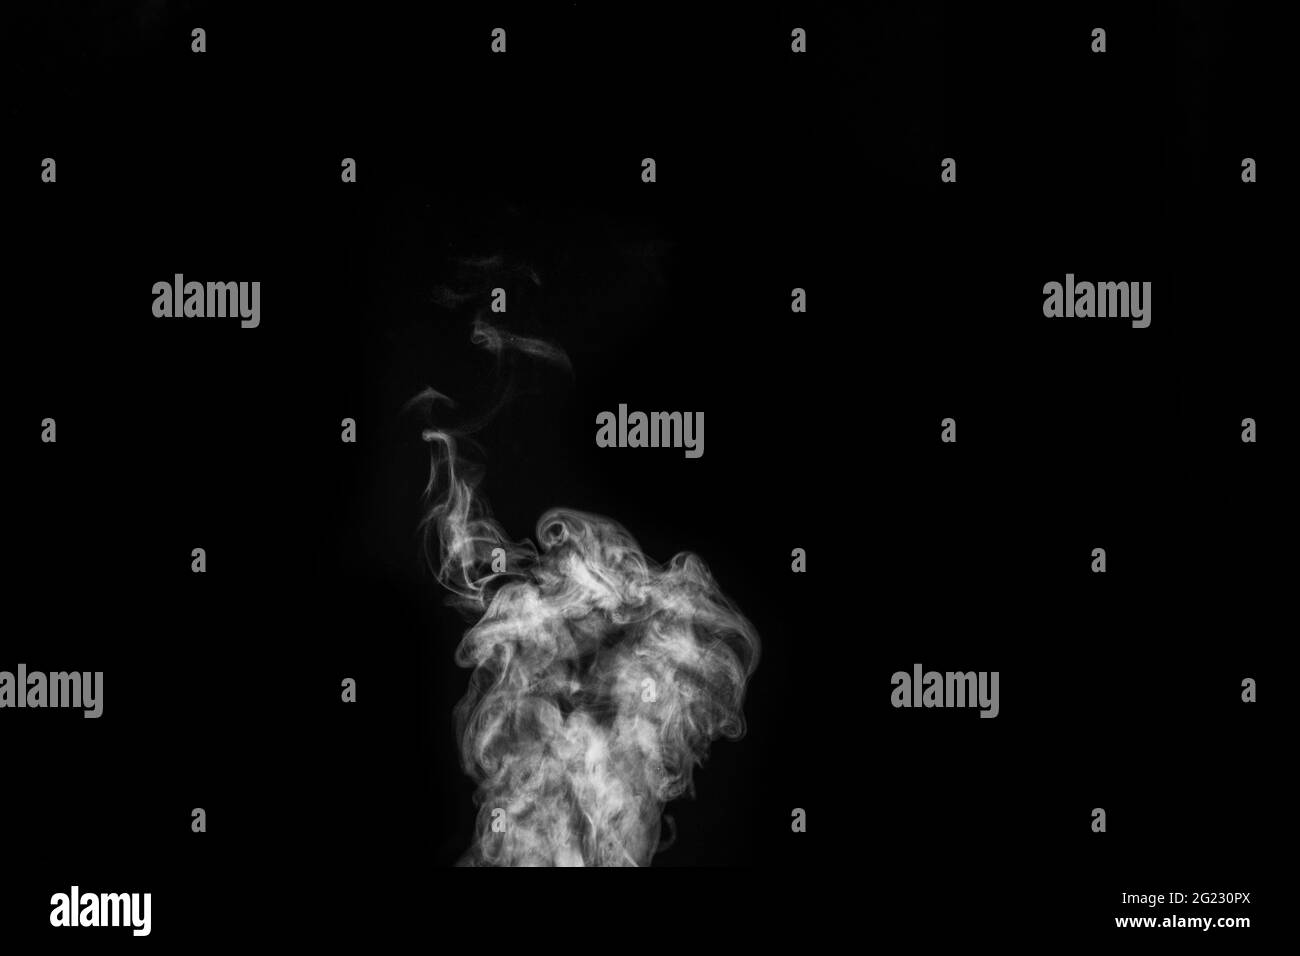 Perfect mystical curly white steam or smoke isolated on black background. Abstract background fog or smog, design element, layout for collages. Stock Photo